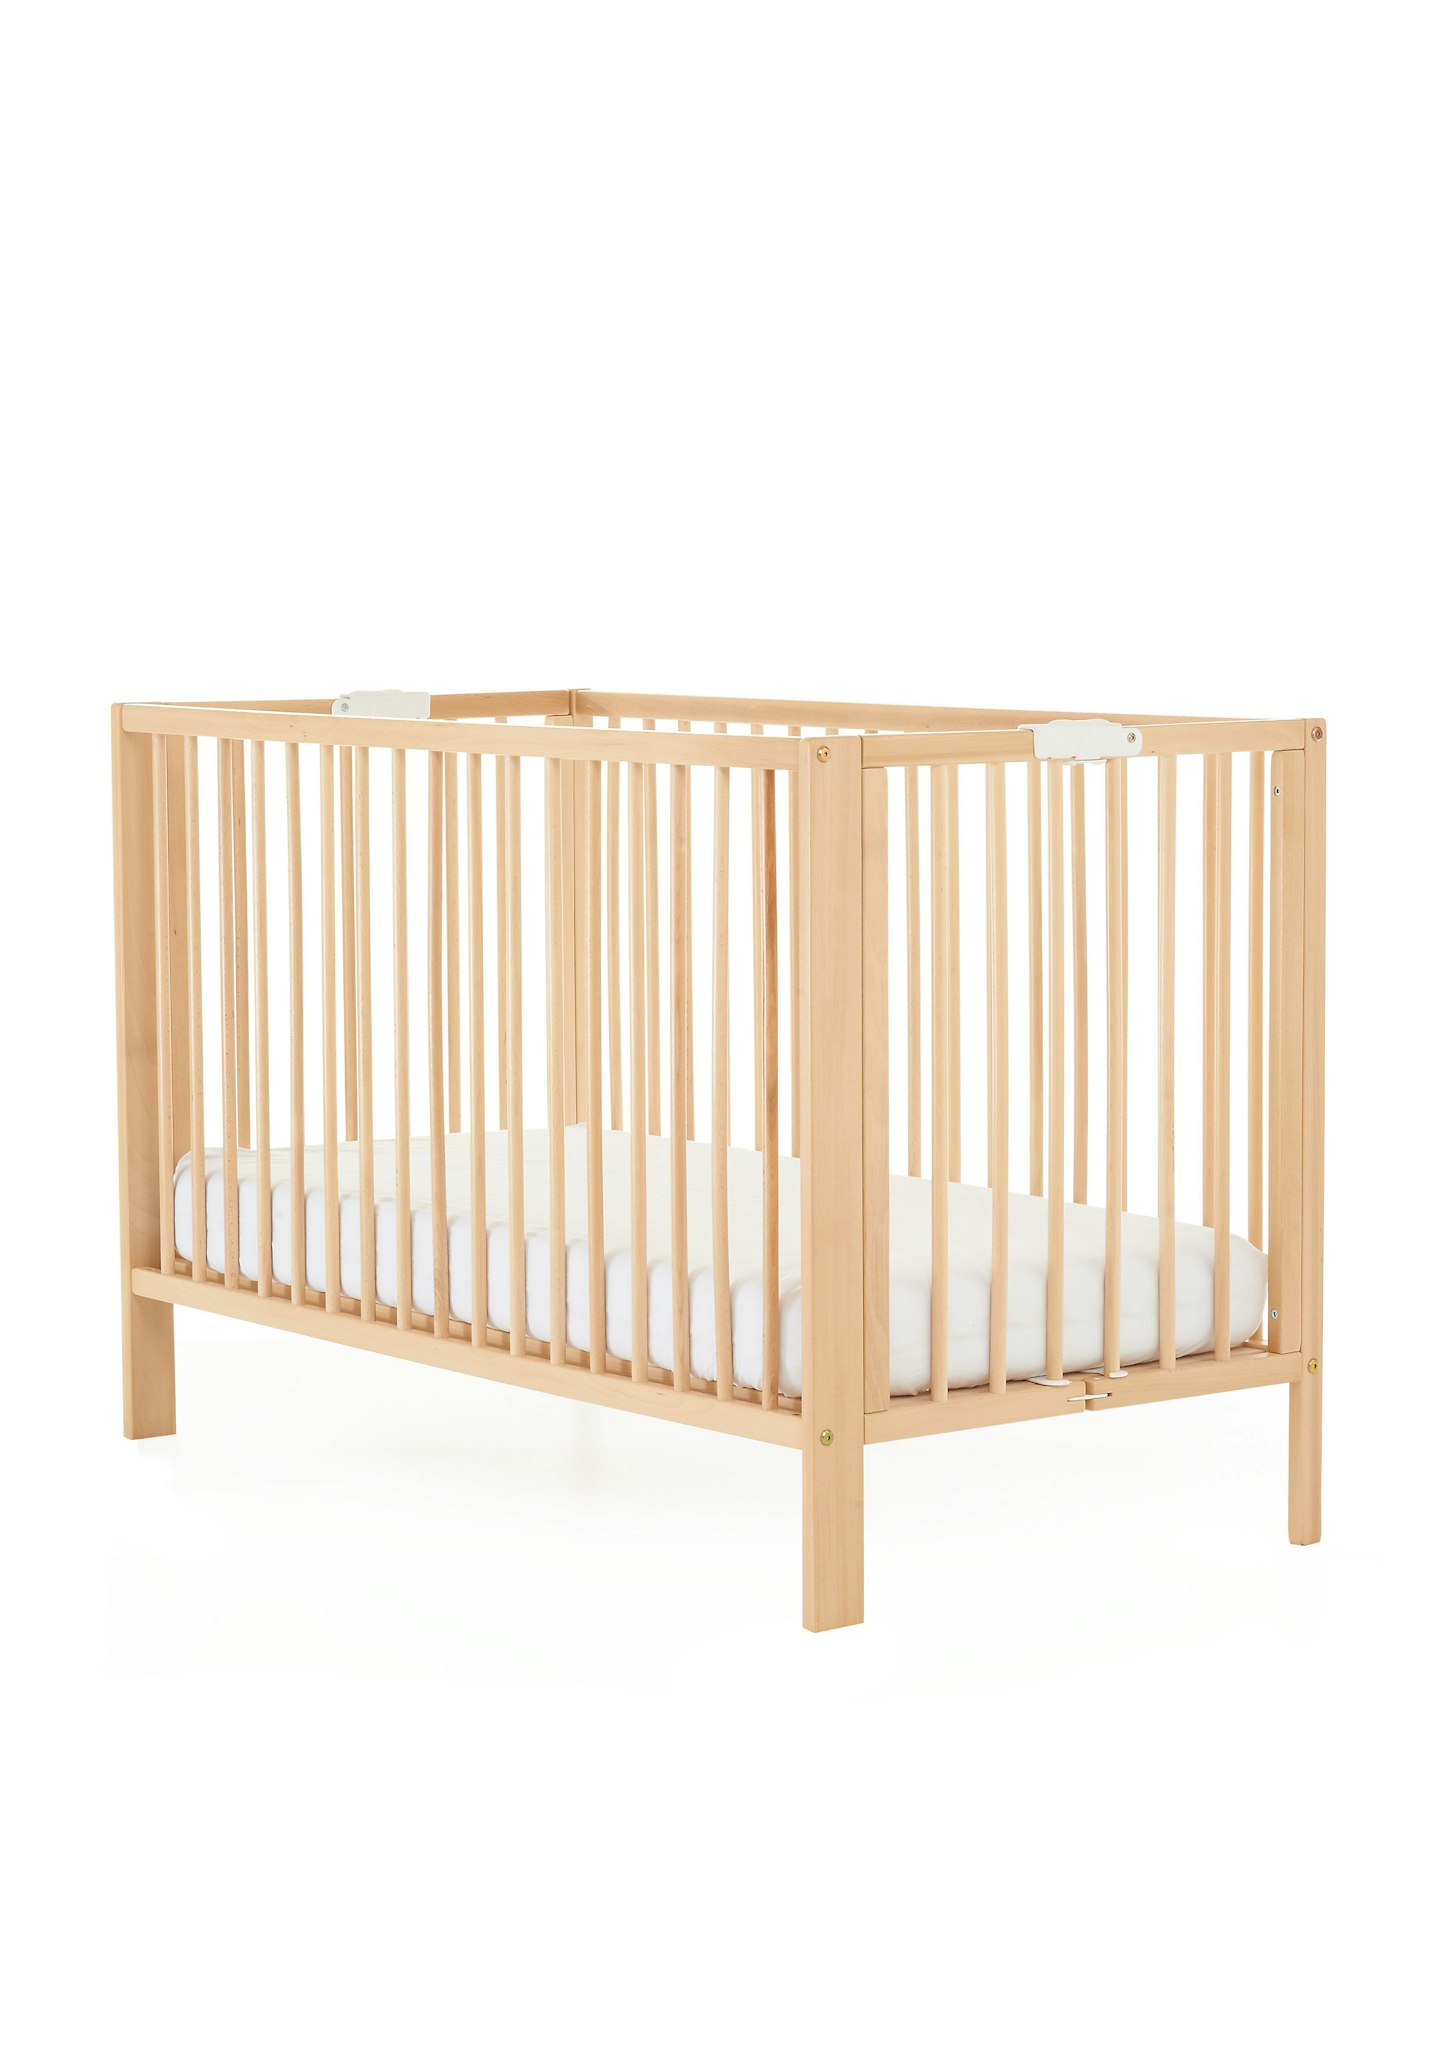 mothercare travel cot mattress size